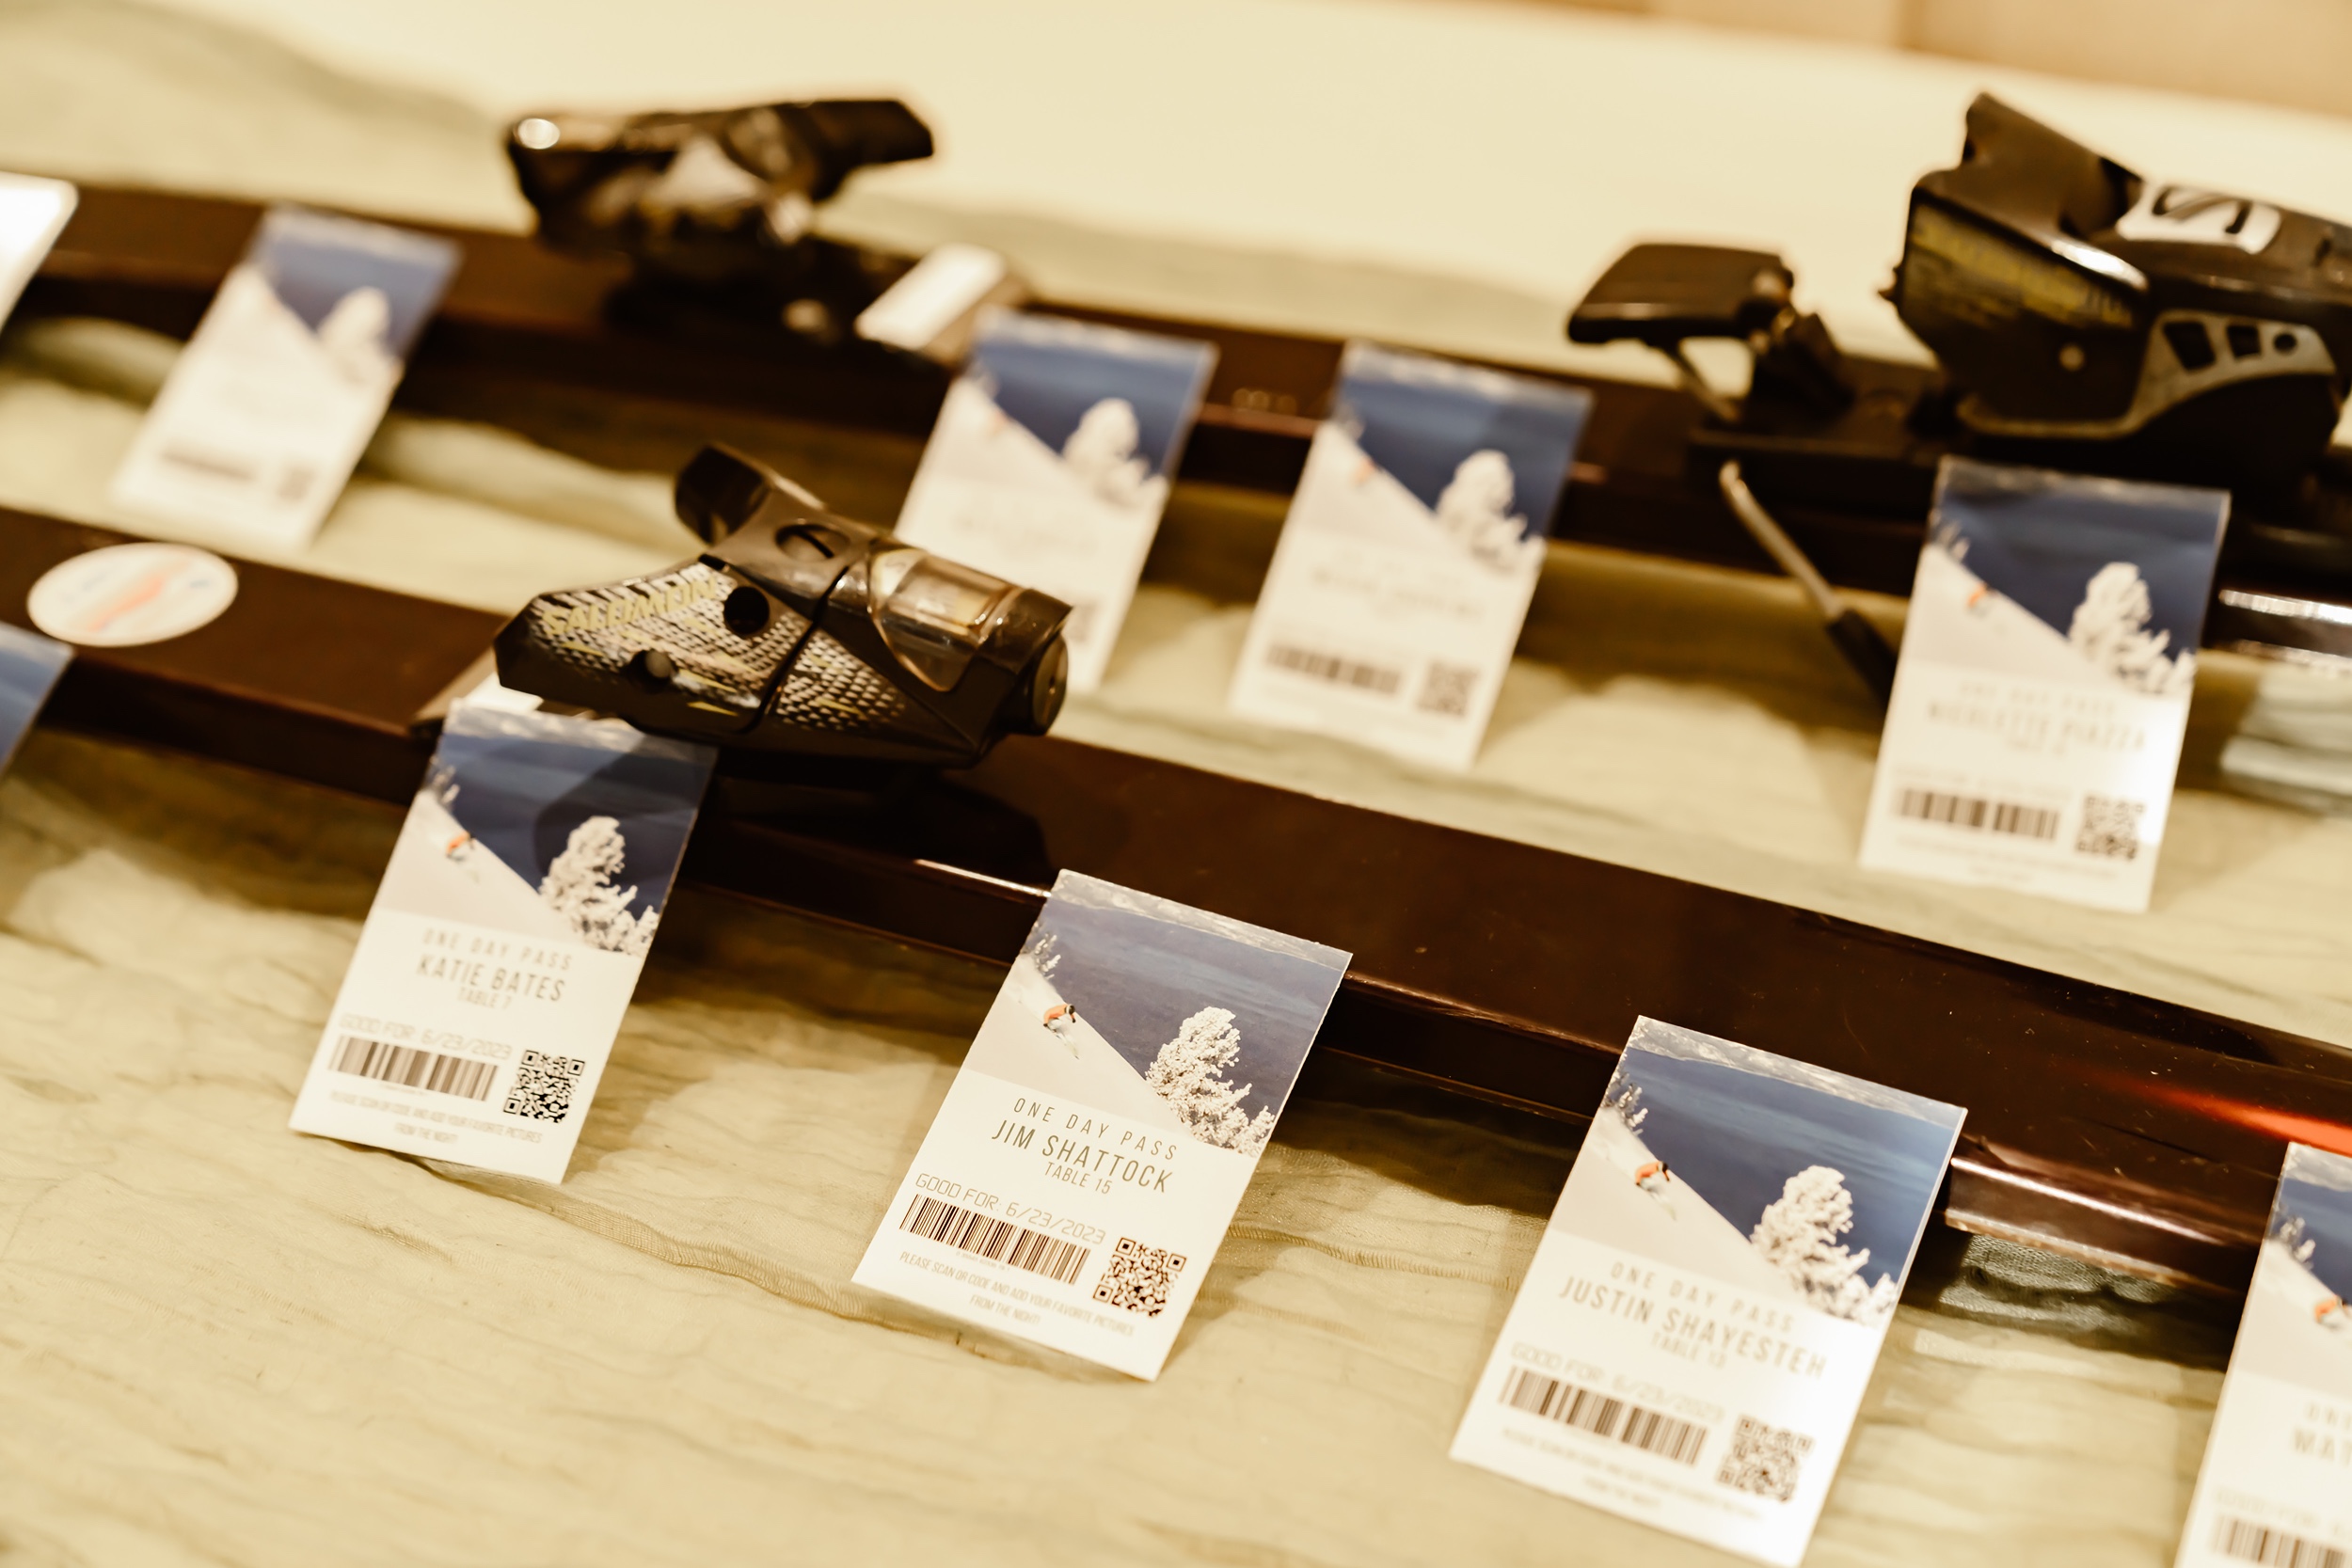 Escort cards made from ski lift tickets